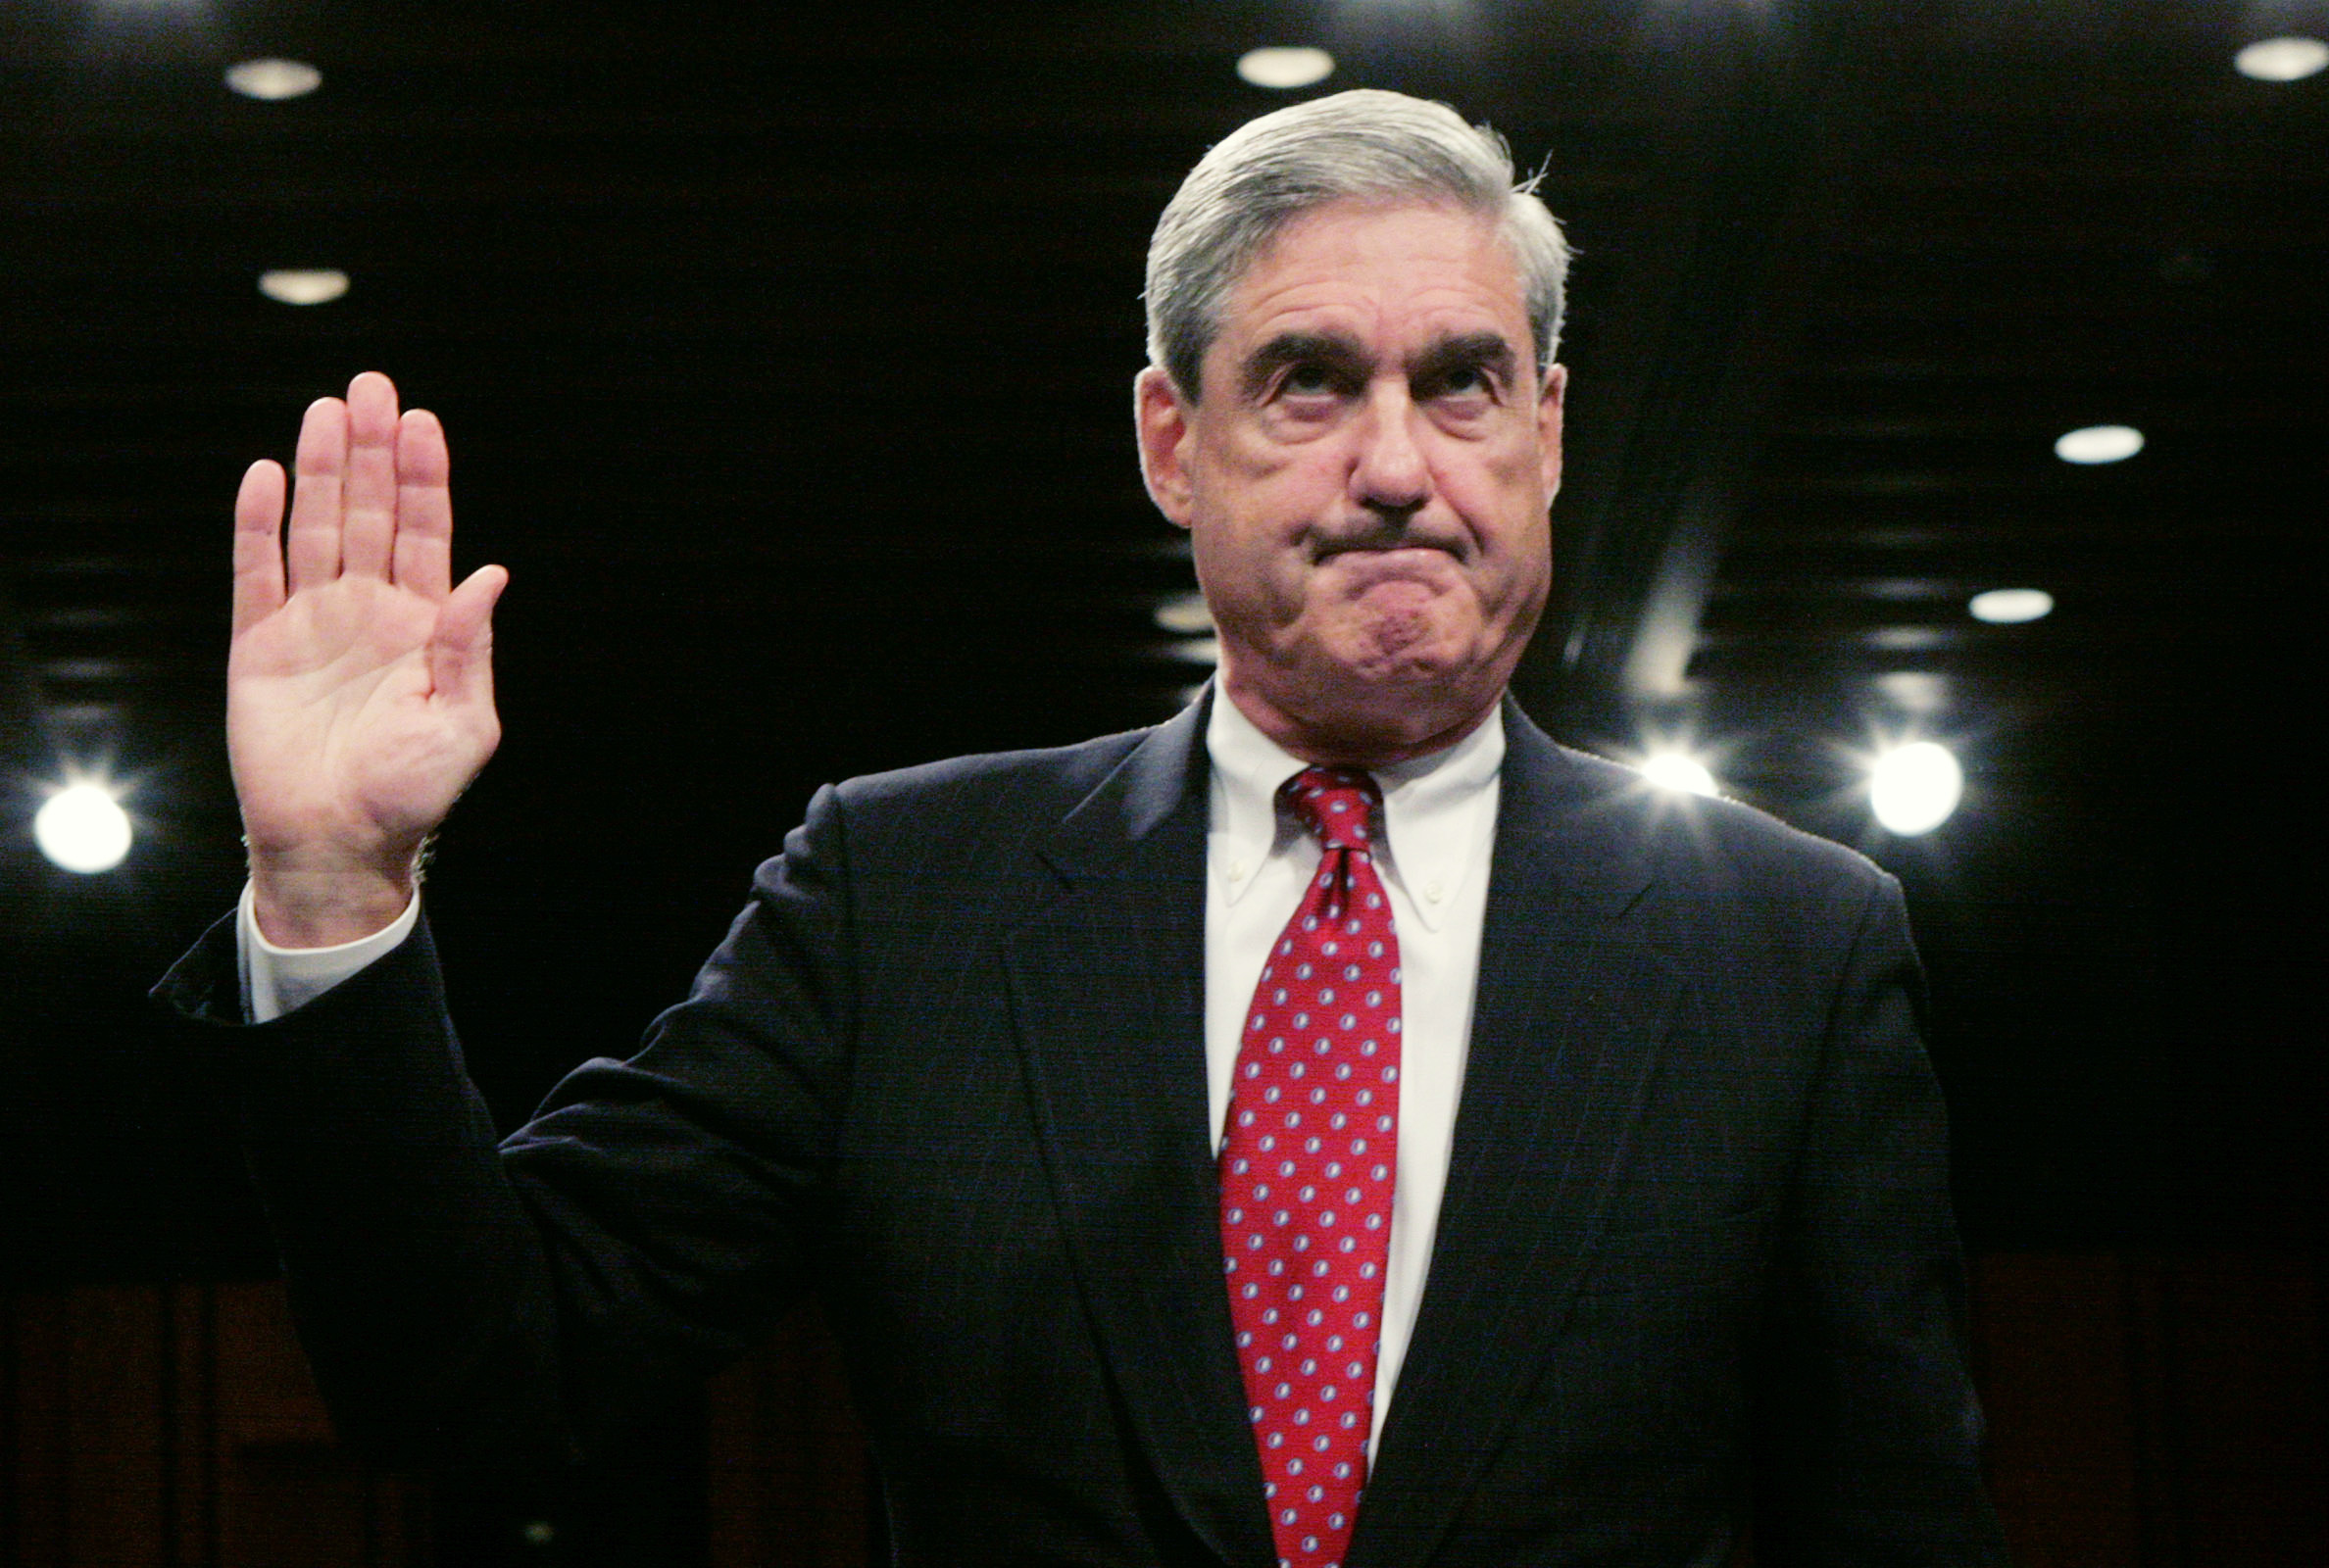 Robert Mueller is sworn in to testify before the Senate Judiciary Committee during a hearing on Capitol Hill. September 17, 2008. REUTERS/Molly Riley